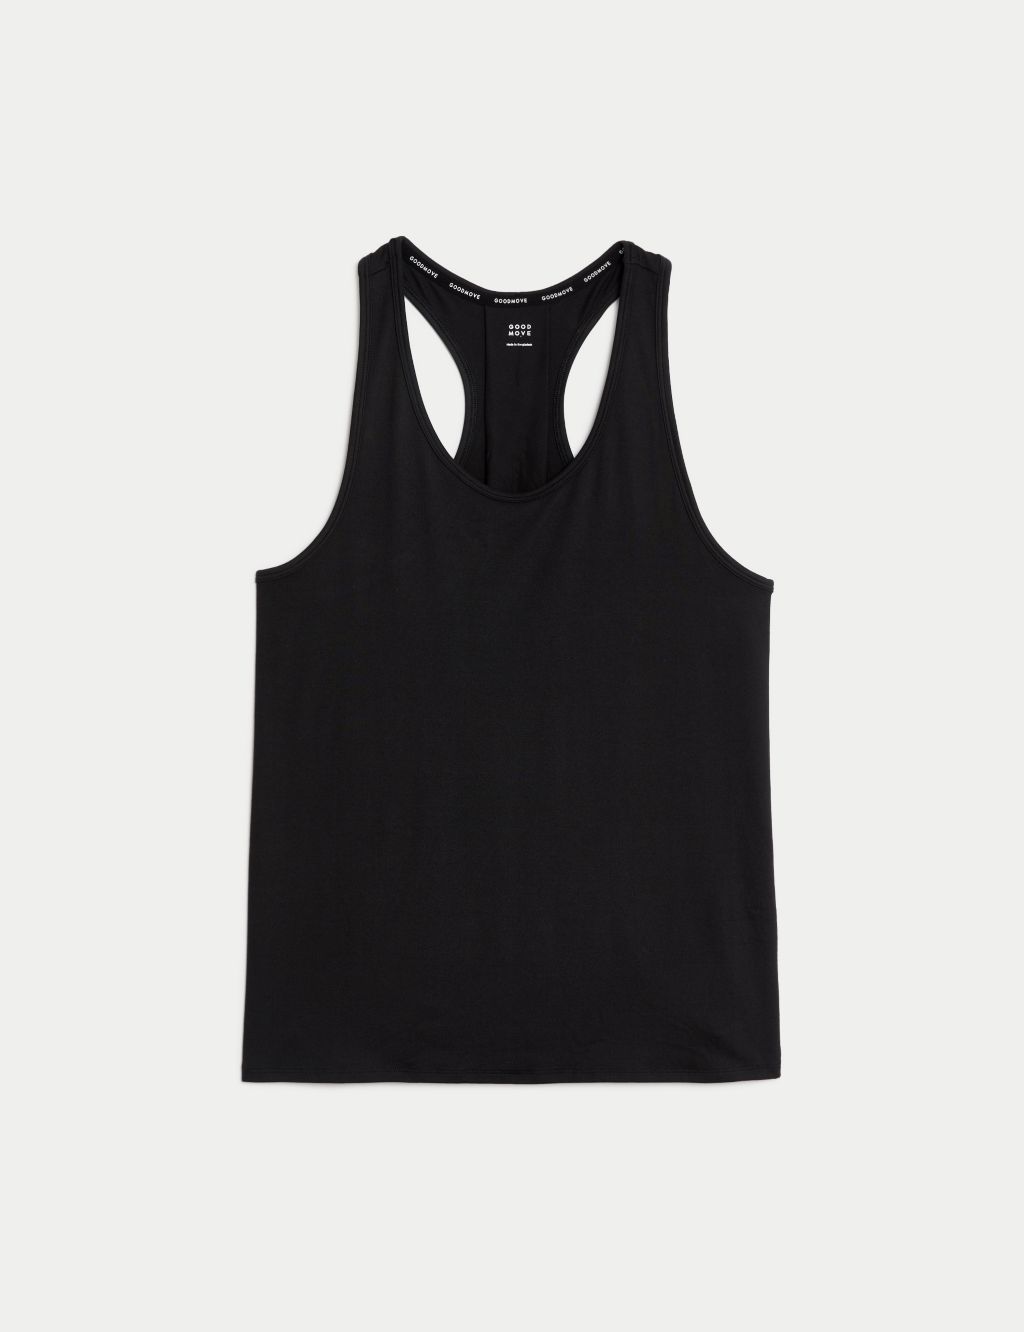 Scoop Neck Relaxed Sleeveless Yoga Top image 1